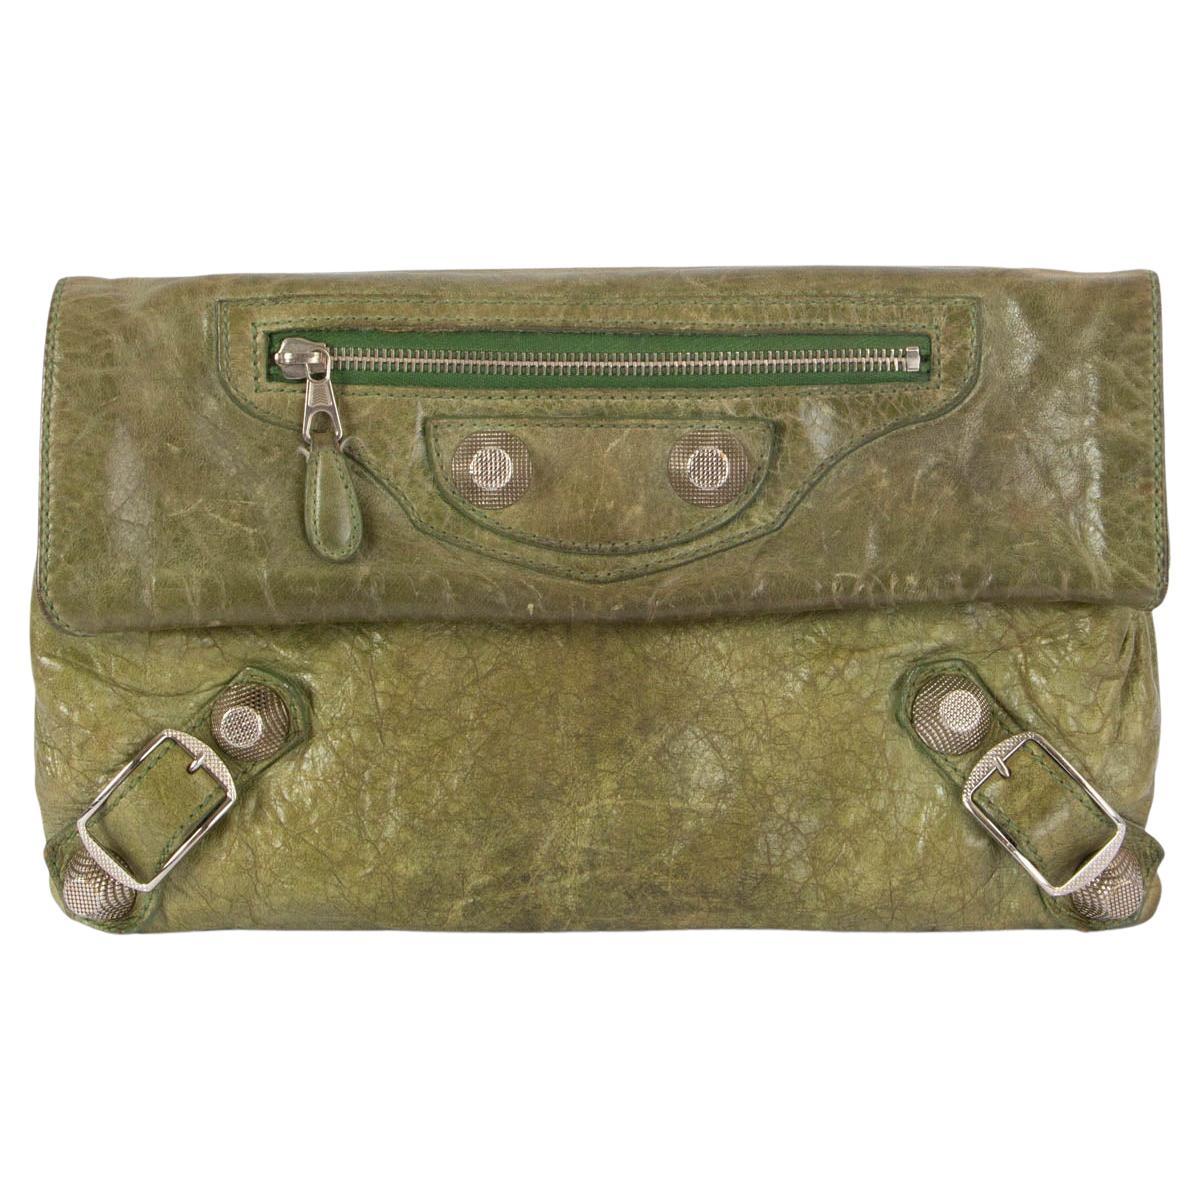 BALENCIAGA Militaire green distressed leather MOTOCROSS GIANT Clutch Bag